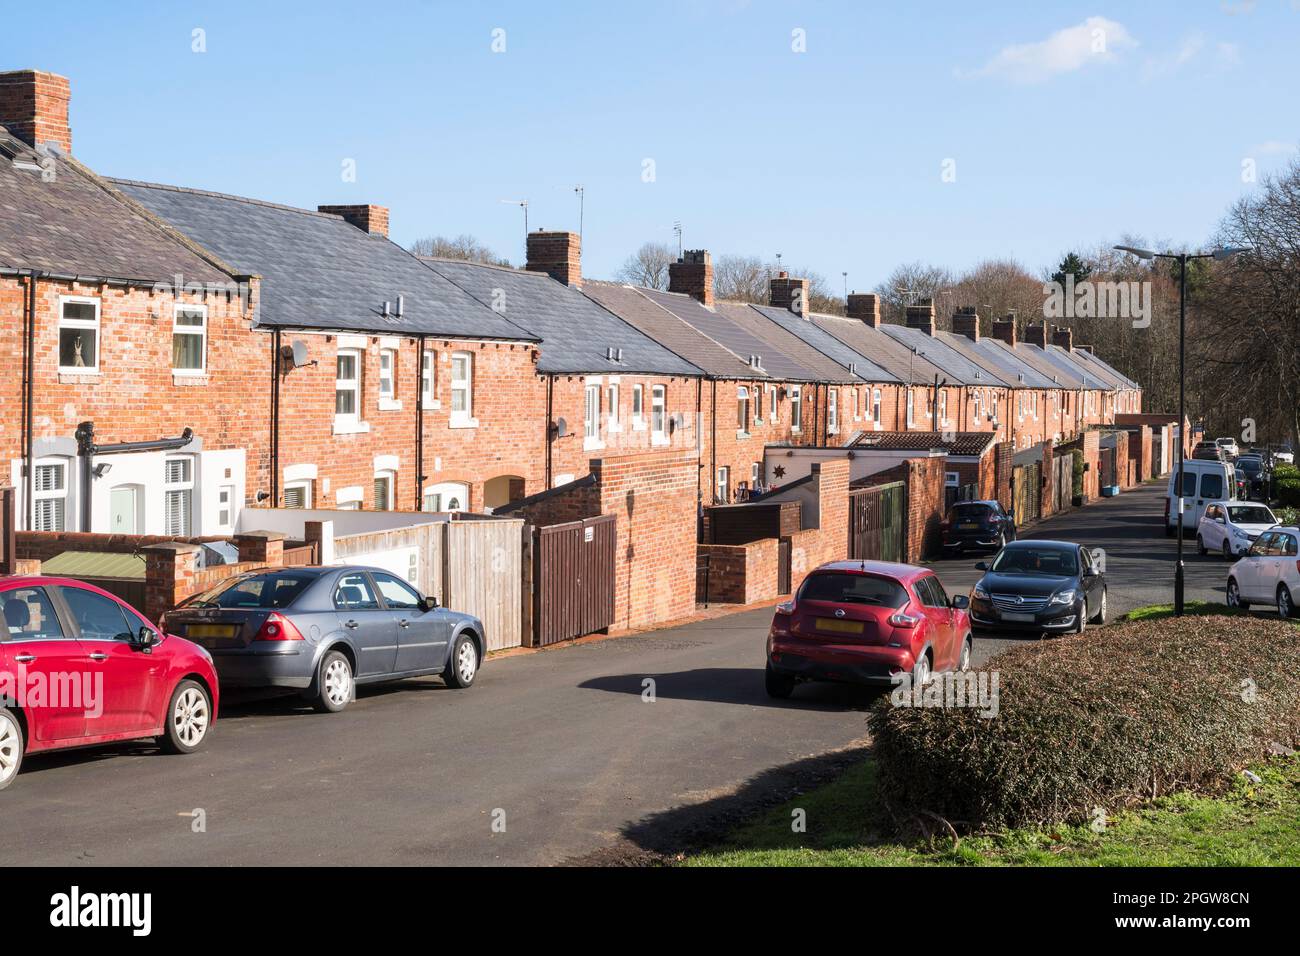 Rear view of a row of terraced houses in East Bridge Street, Fatfield, Tyne and Wear, England, UK Stock Photo